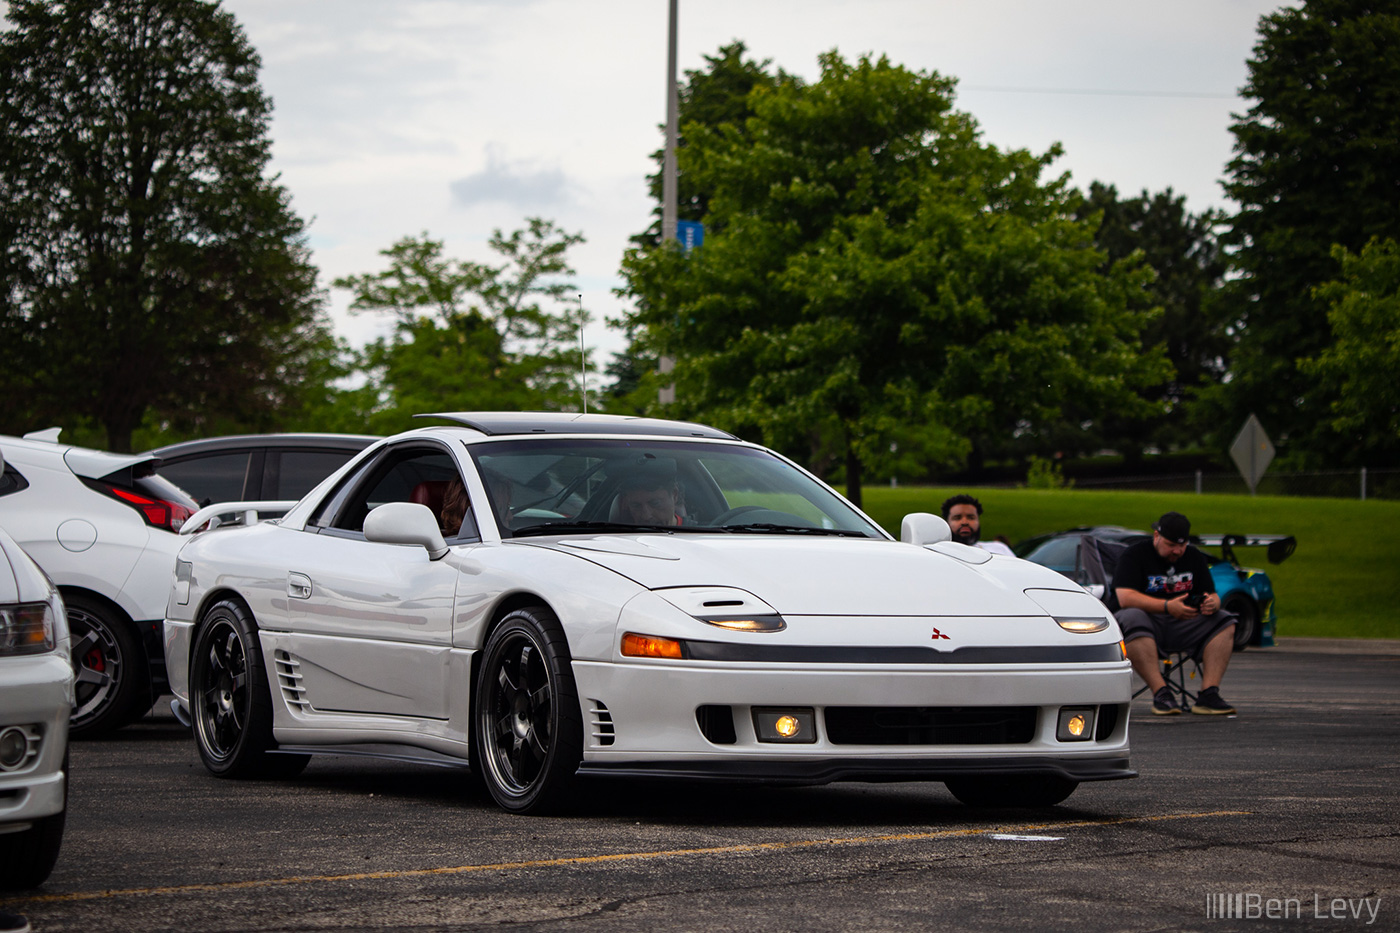 White Mitsubishi 3000GT VR-4 at Cars and Culture Car Show